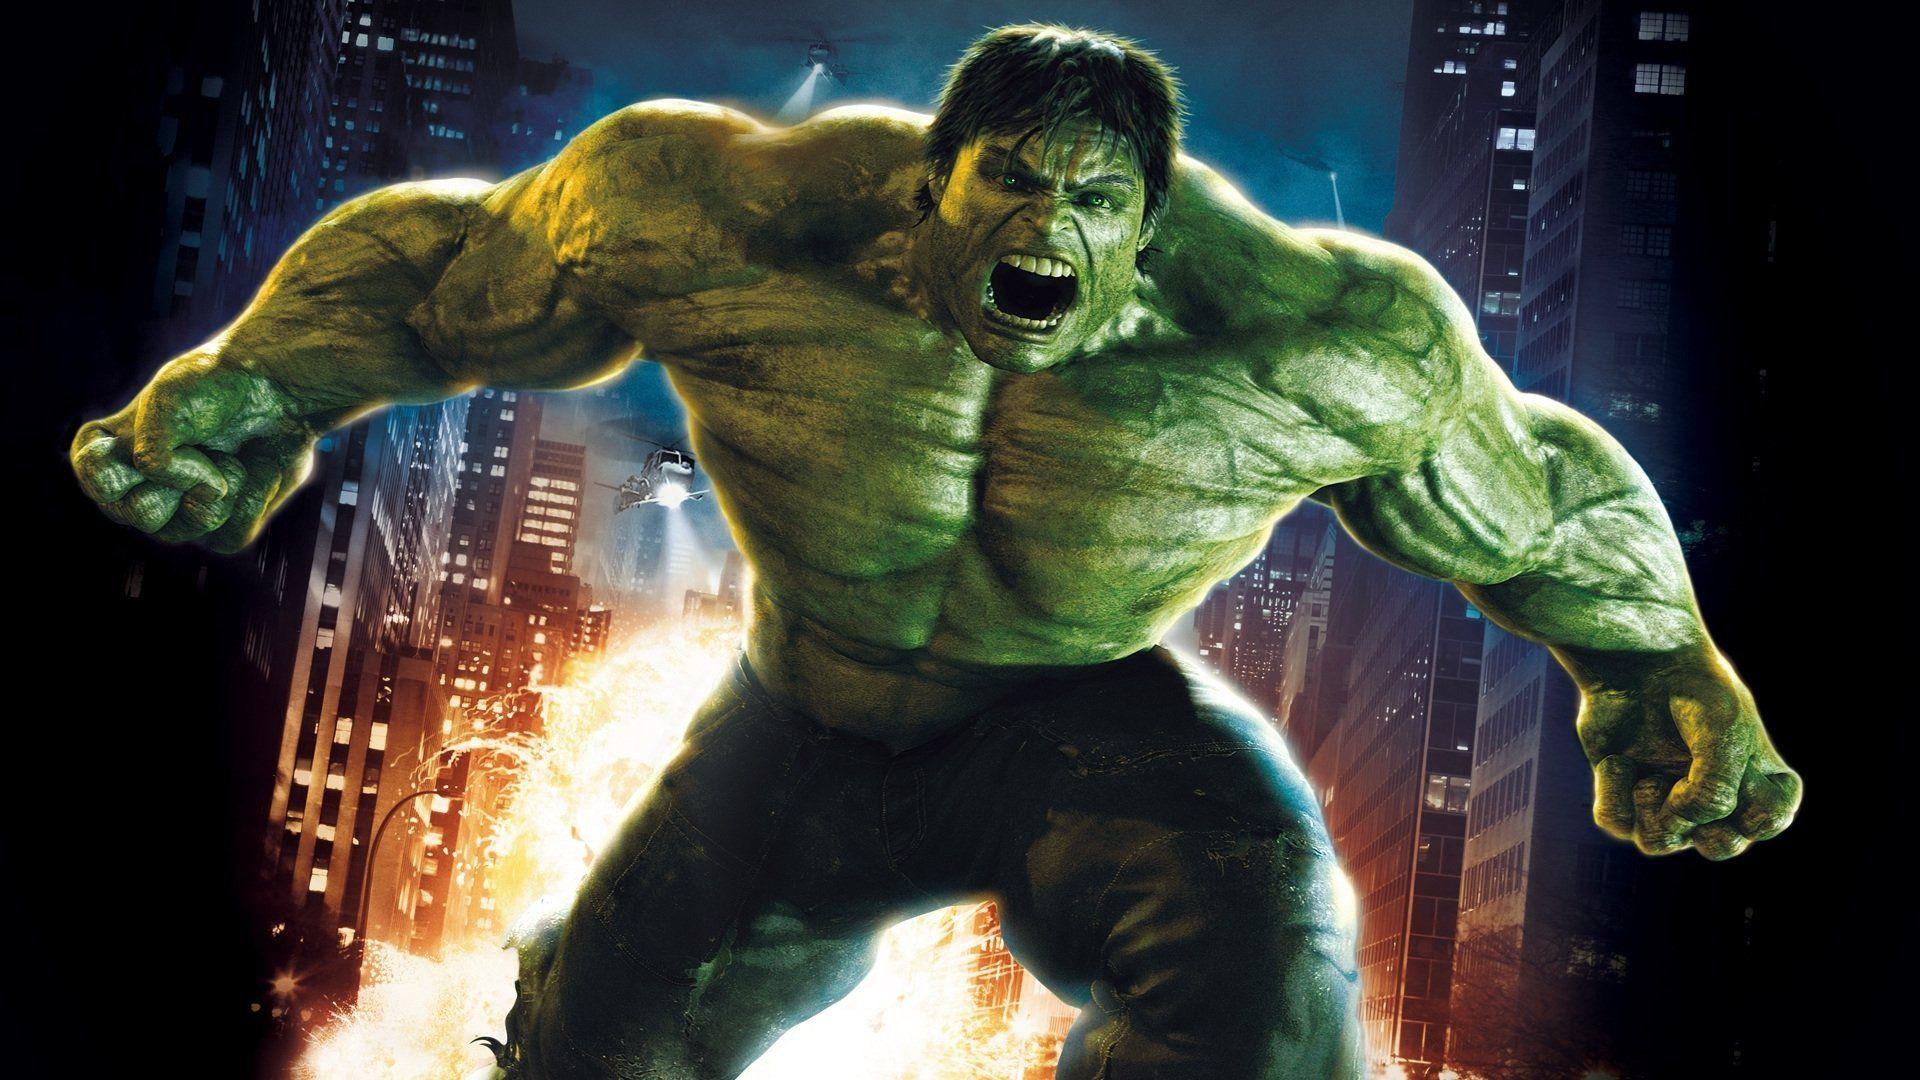 Incredible hulk Full HD Wallpaper and Background Imagex1080